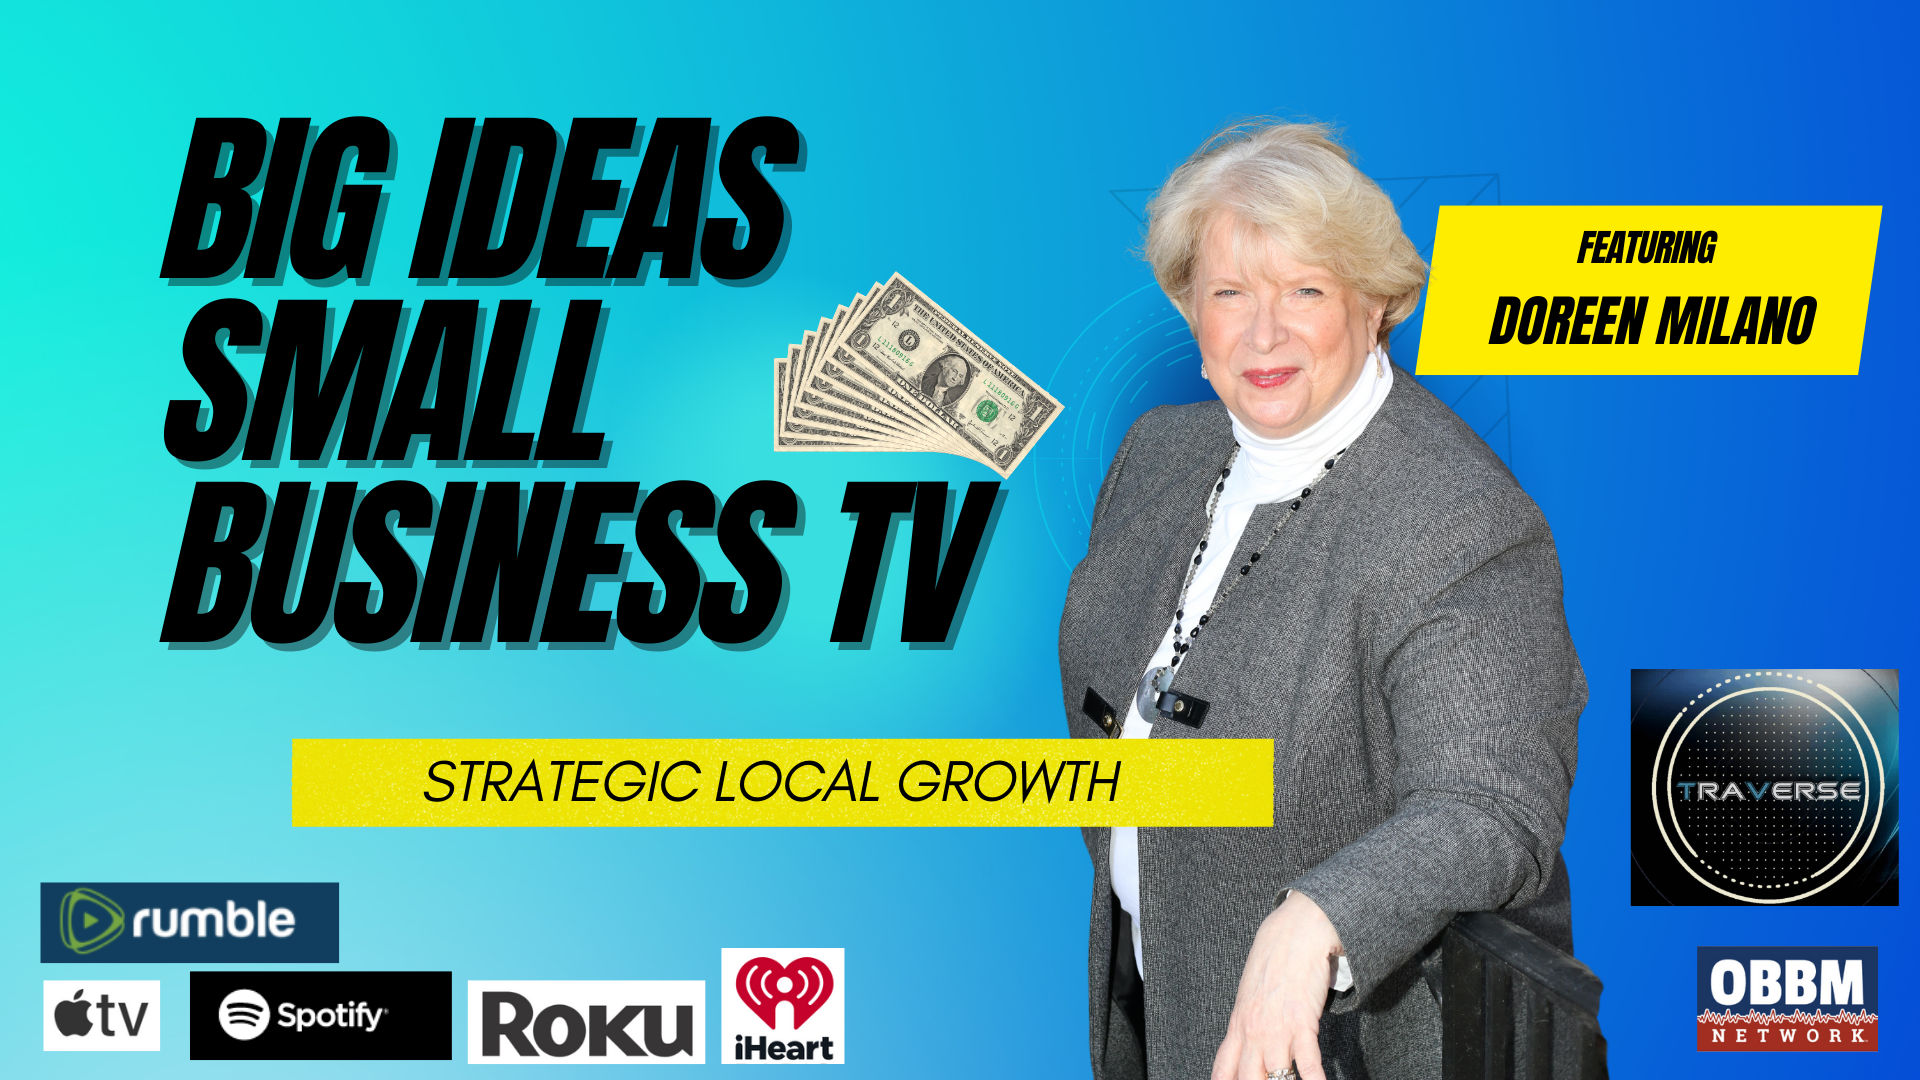 BISB25-Strategic Local Growth - Big Ideas, Small Business TV with Doreen Milano